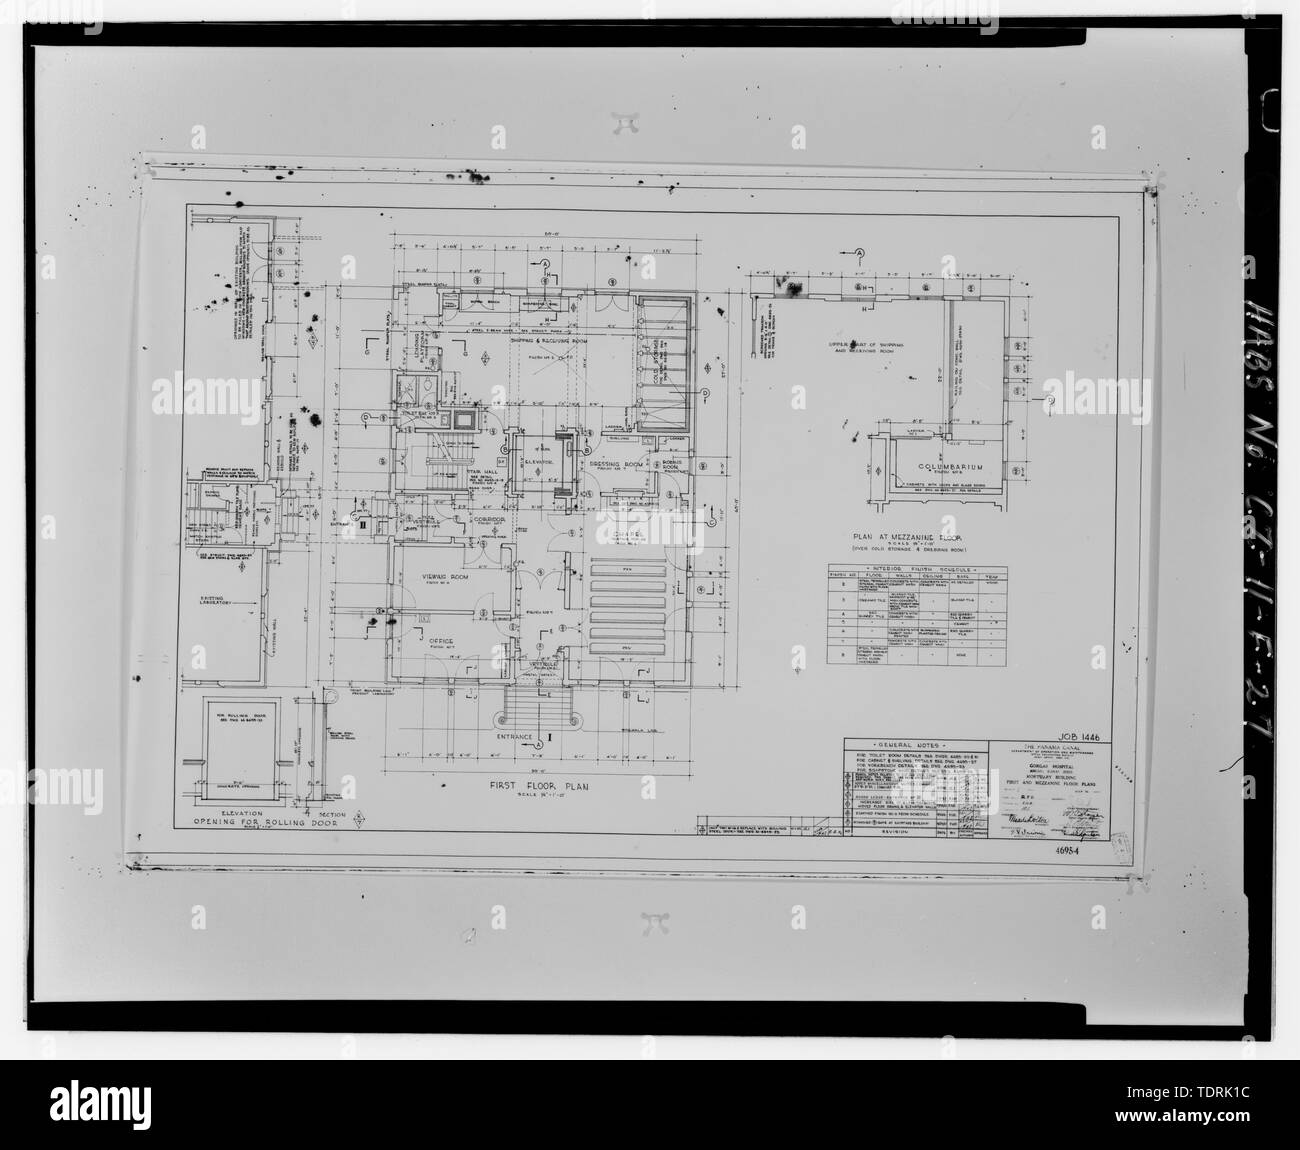 Photographic copy of architectural drawing no. 4695-4 dated 1941 on file at the Engineering and Planning Office, Panama Canal Commission, Balboa, Republic and Panama. First floor plan. - Gorgas Hospital, Mortuary and Chapel, Gorgas Road, Balboa Heights, Former Panama Canal Zone, CZ Stock Photo